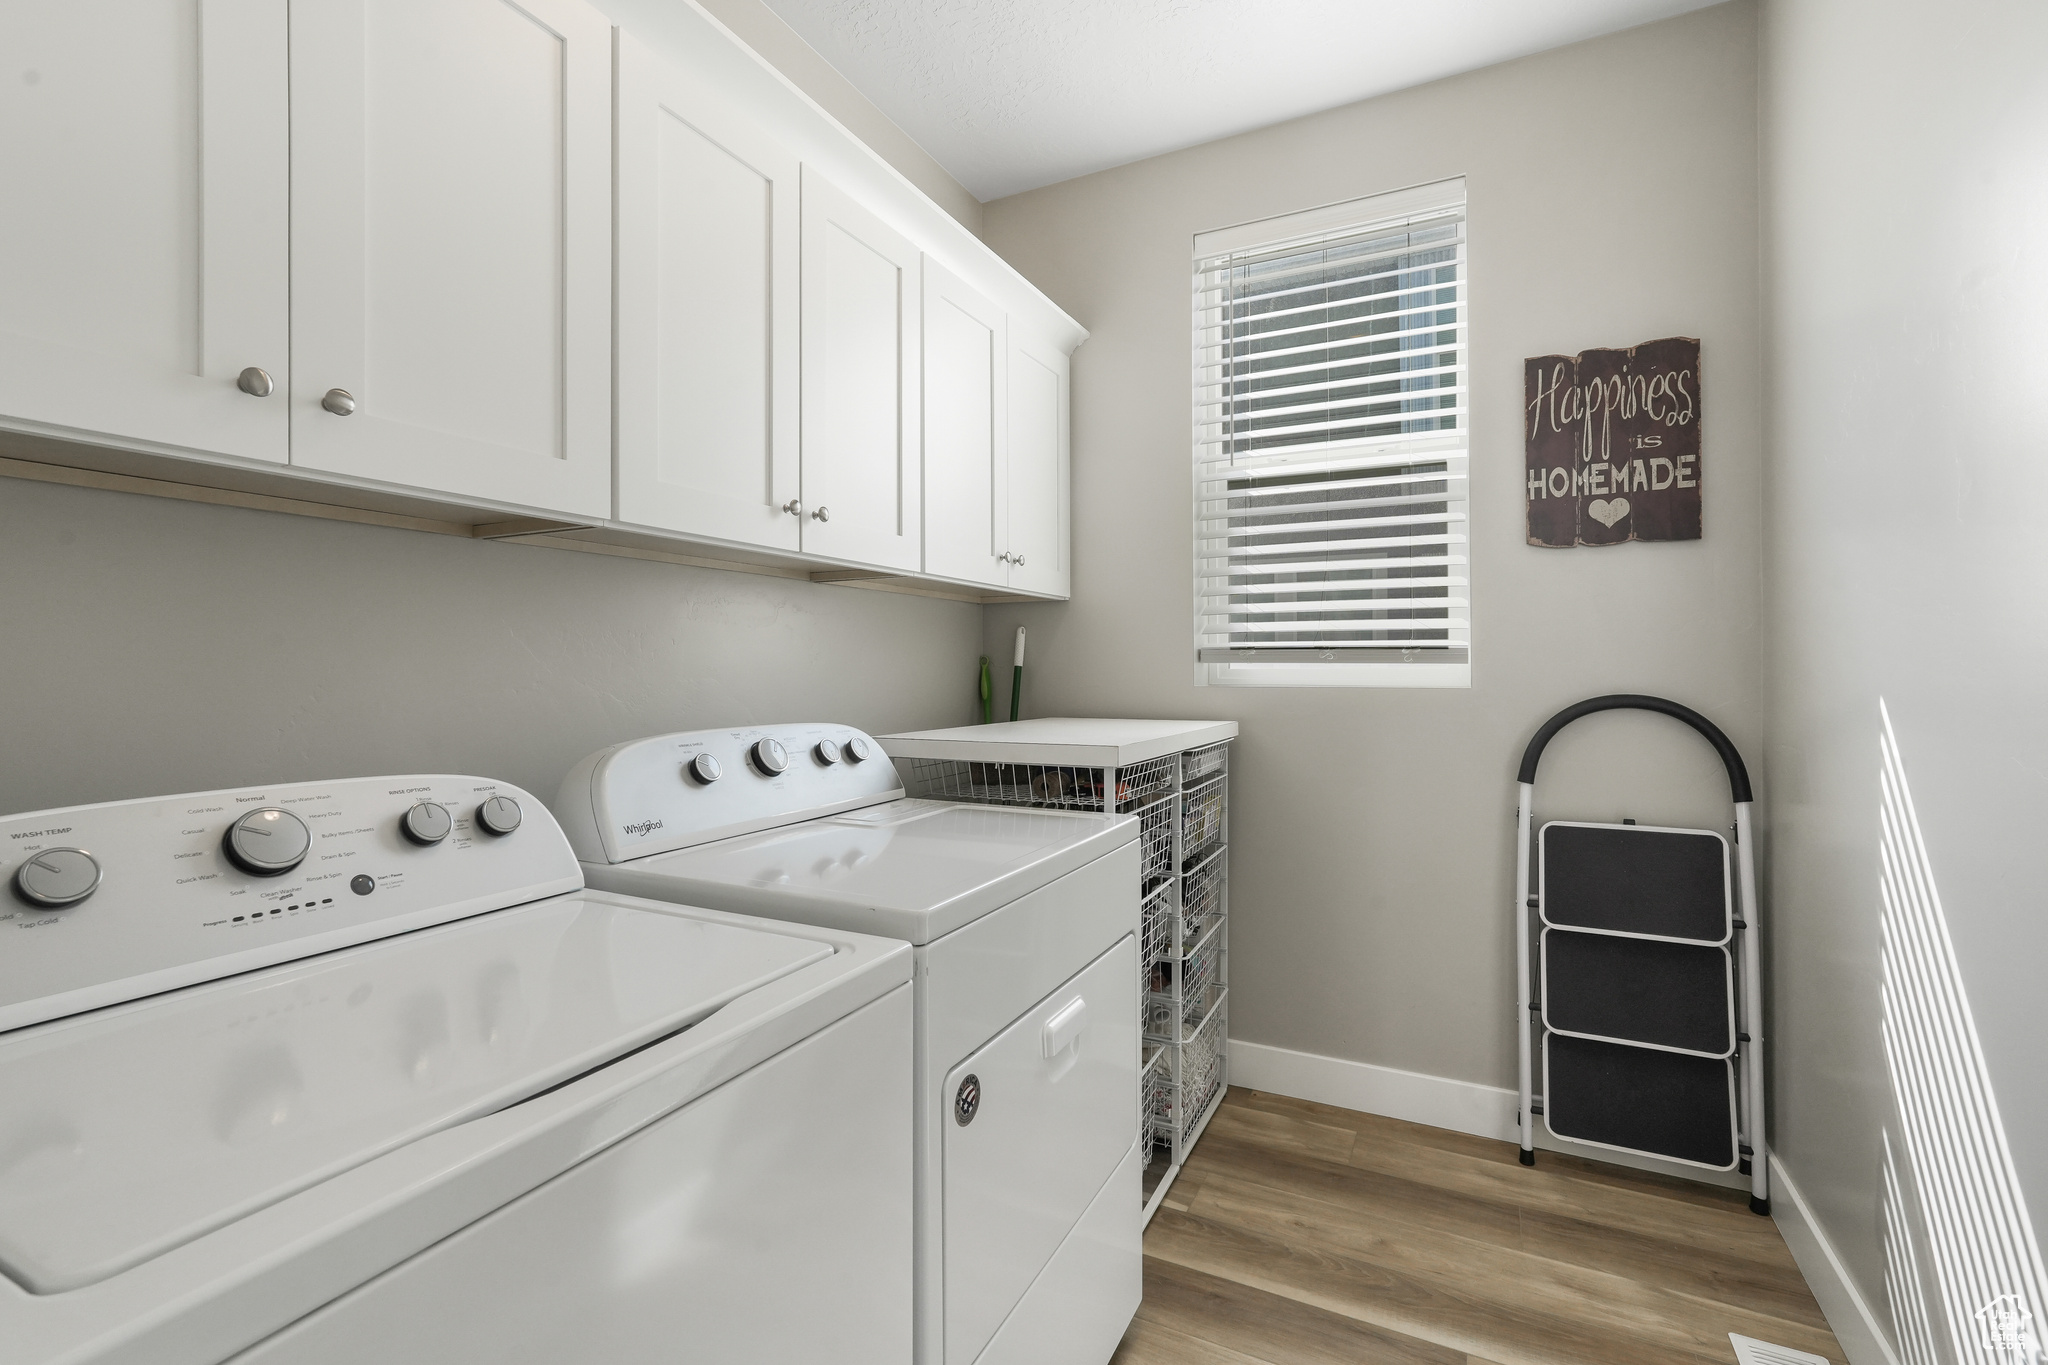 Large laundry room with lots of built in cabinets